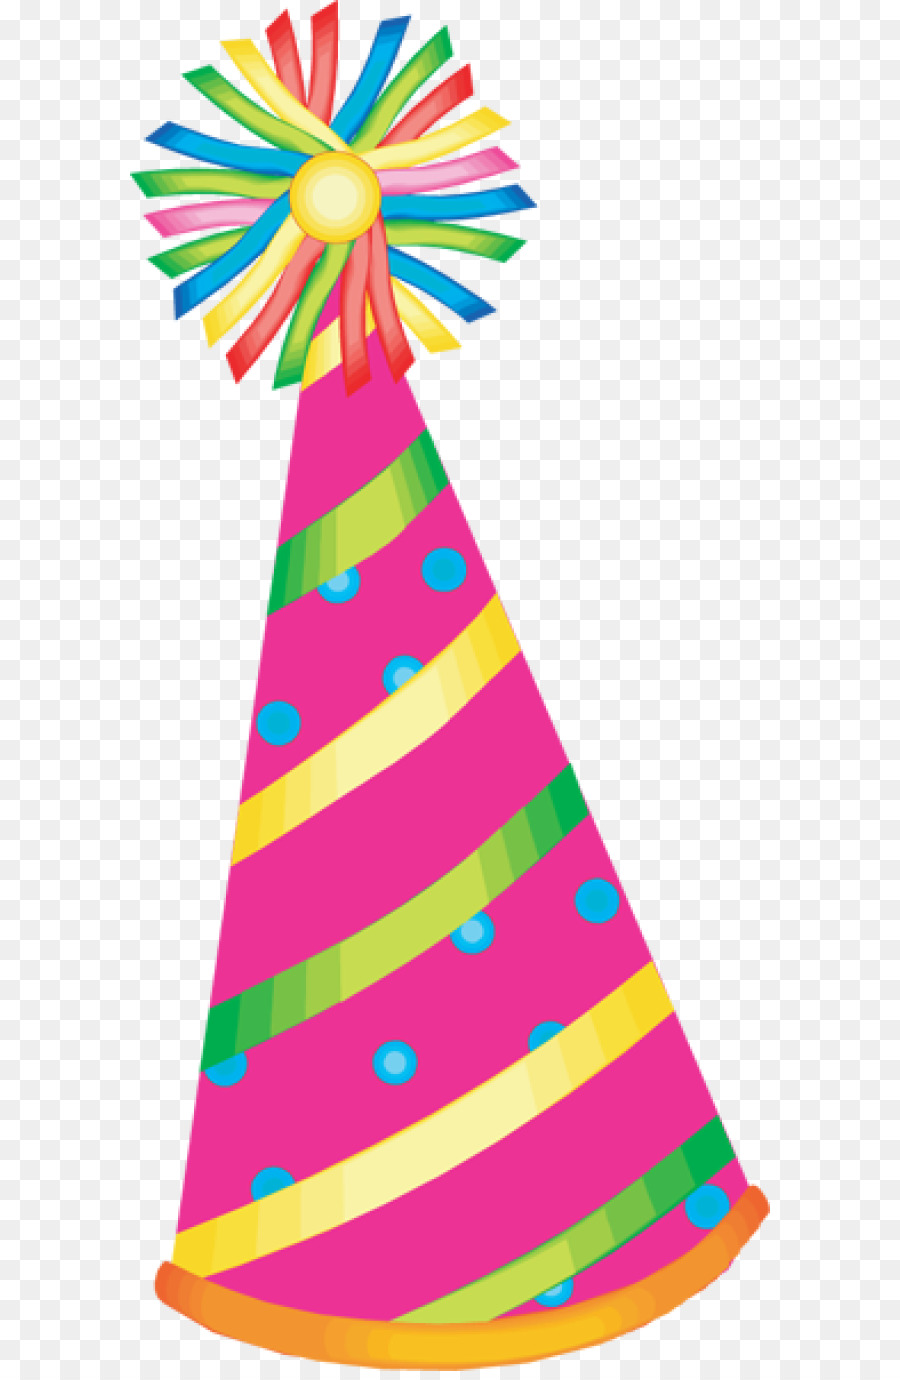 Party hat Clip art - Party Hats Cliparts png download - 640*1371 - Free Transparent Party Hat png Download.